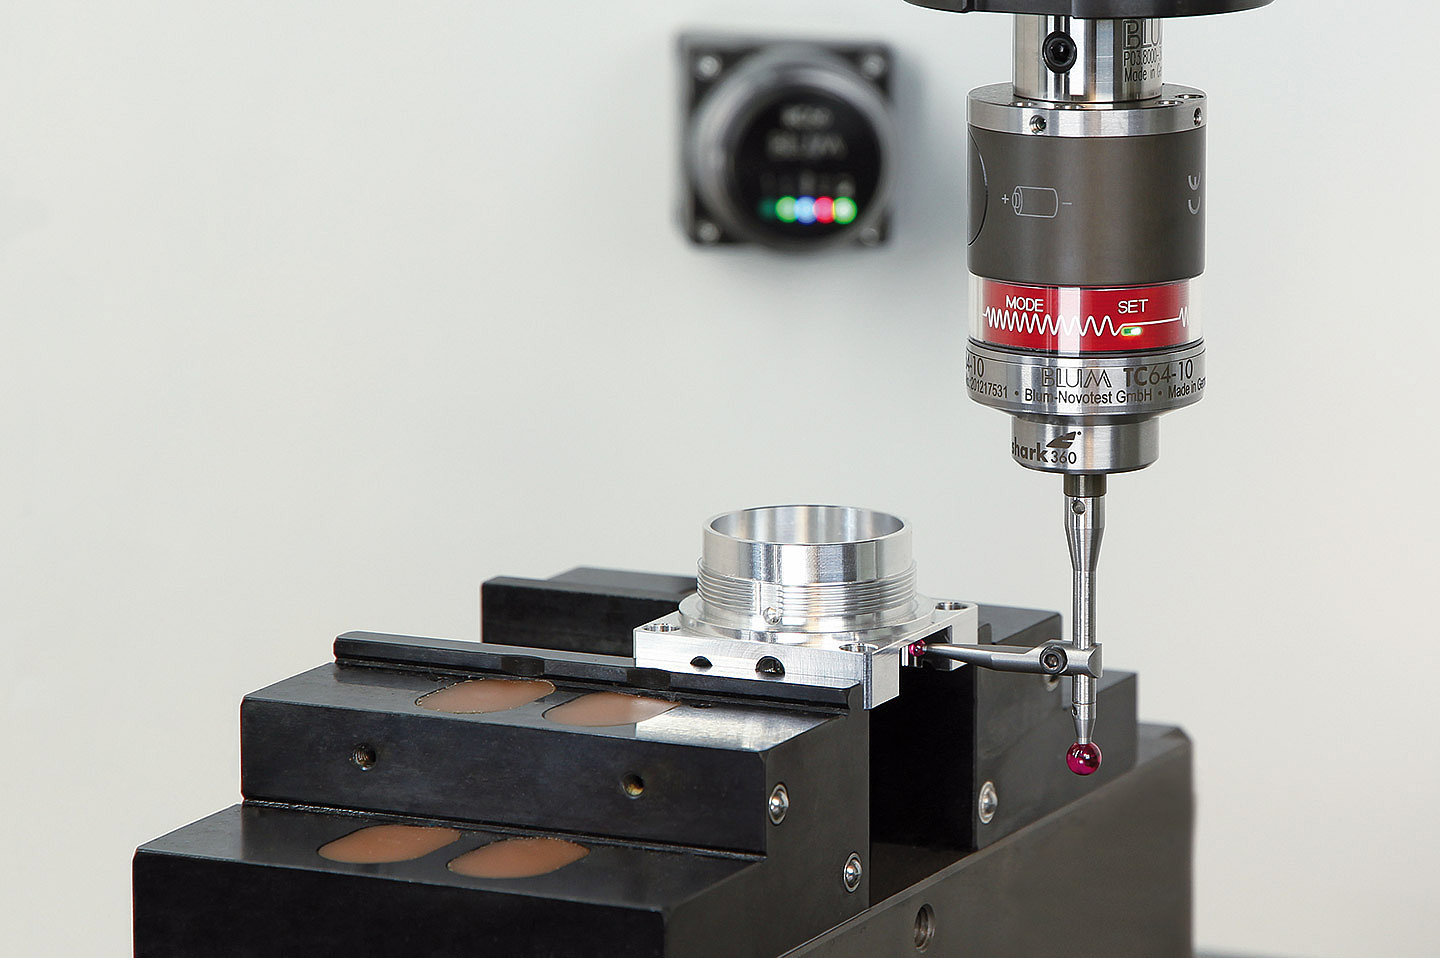 Workpiece measurement with TC54-10 touch probe